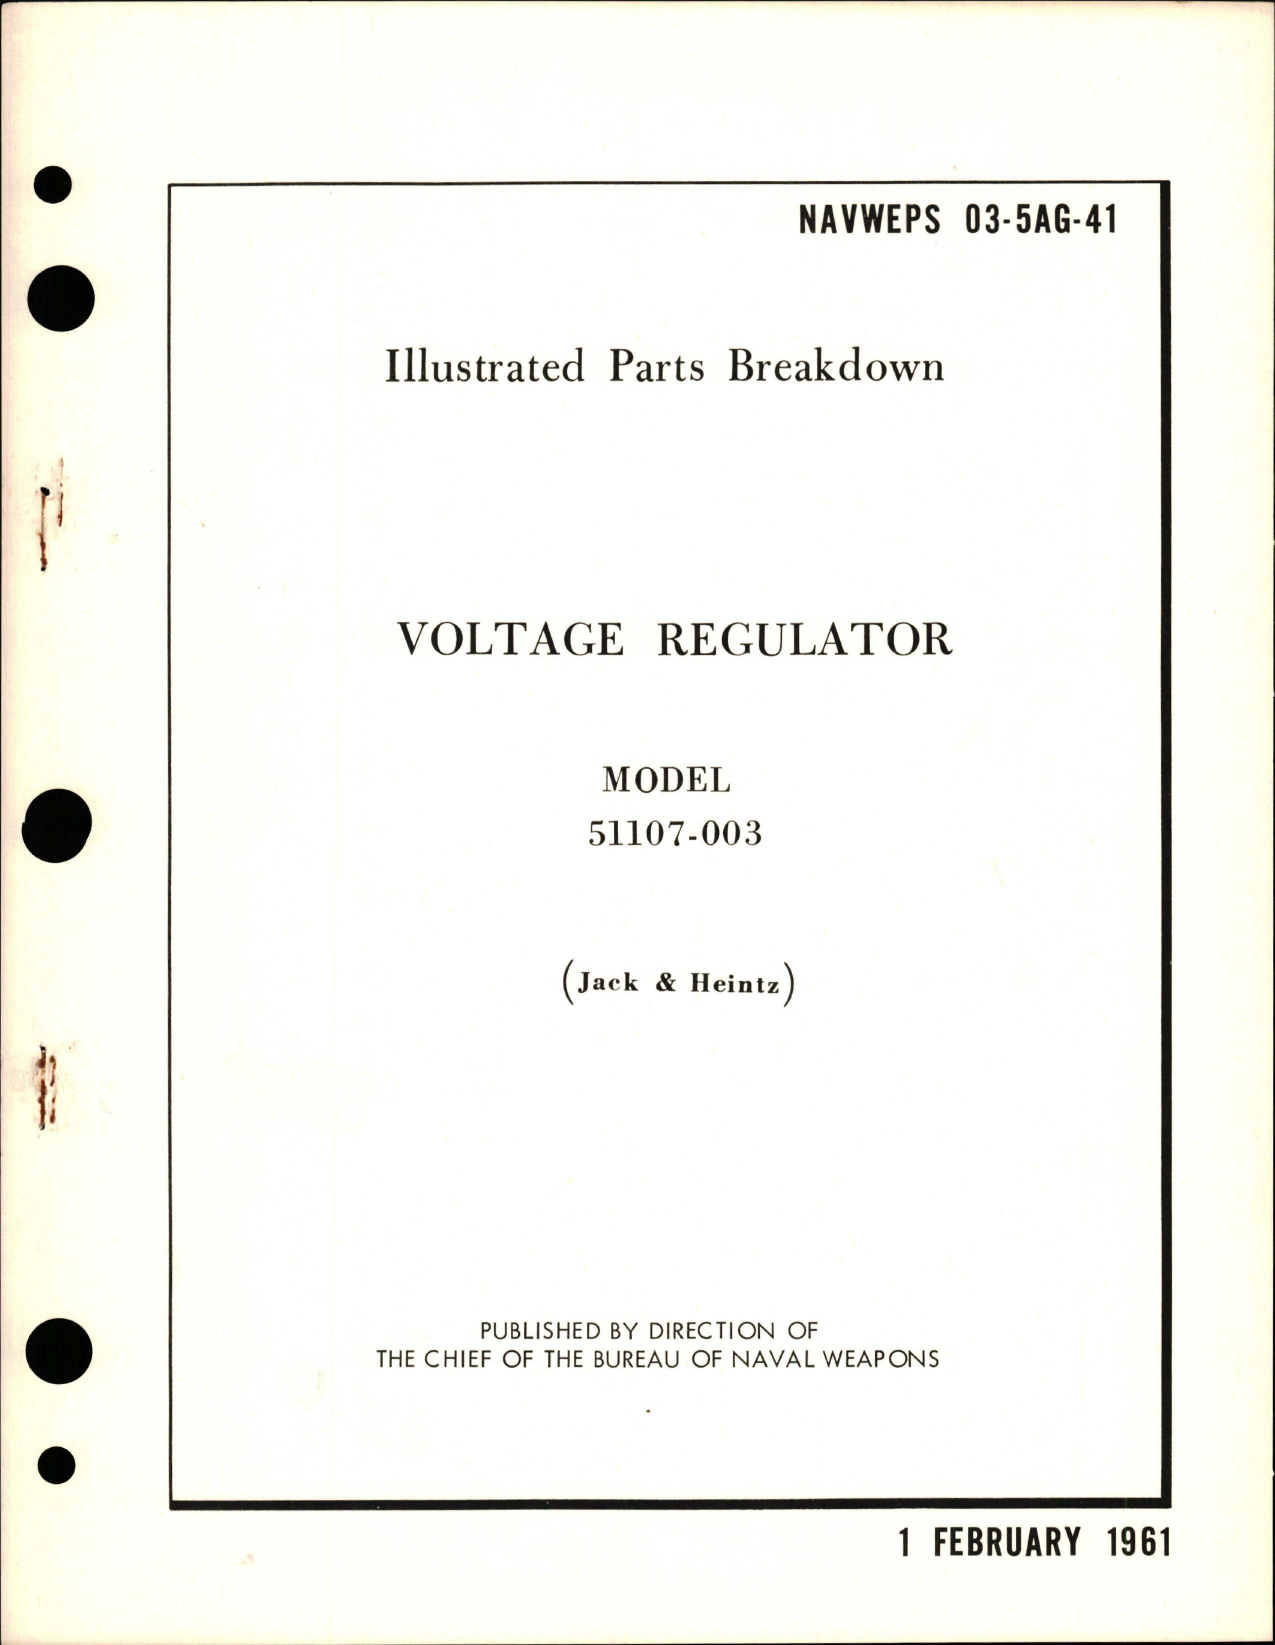 Sample page 1 from AirCorps Library document: Illustrated Parts Breakdown for Voltage Regulator - Model 51107-003 